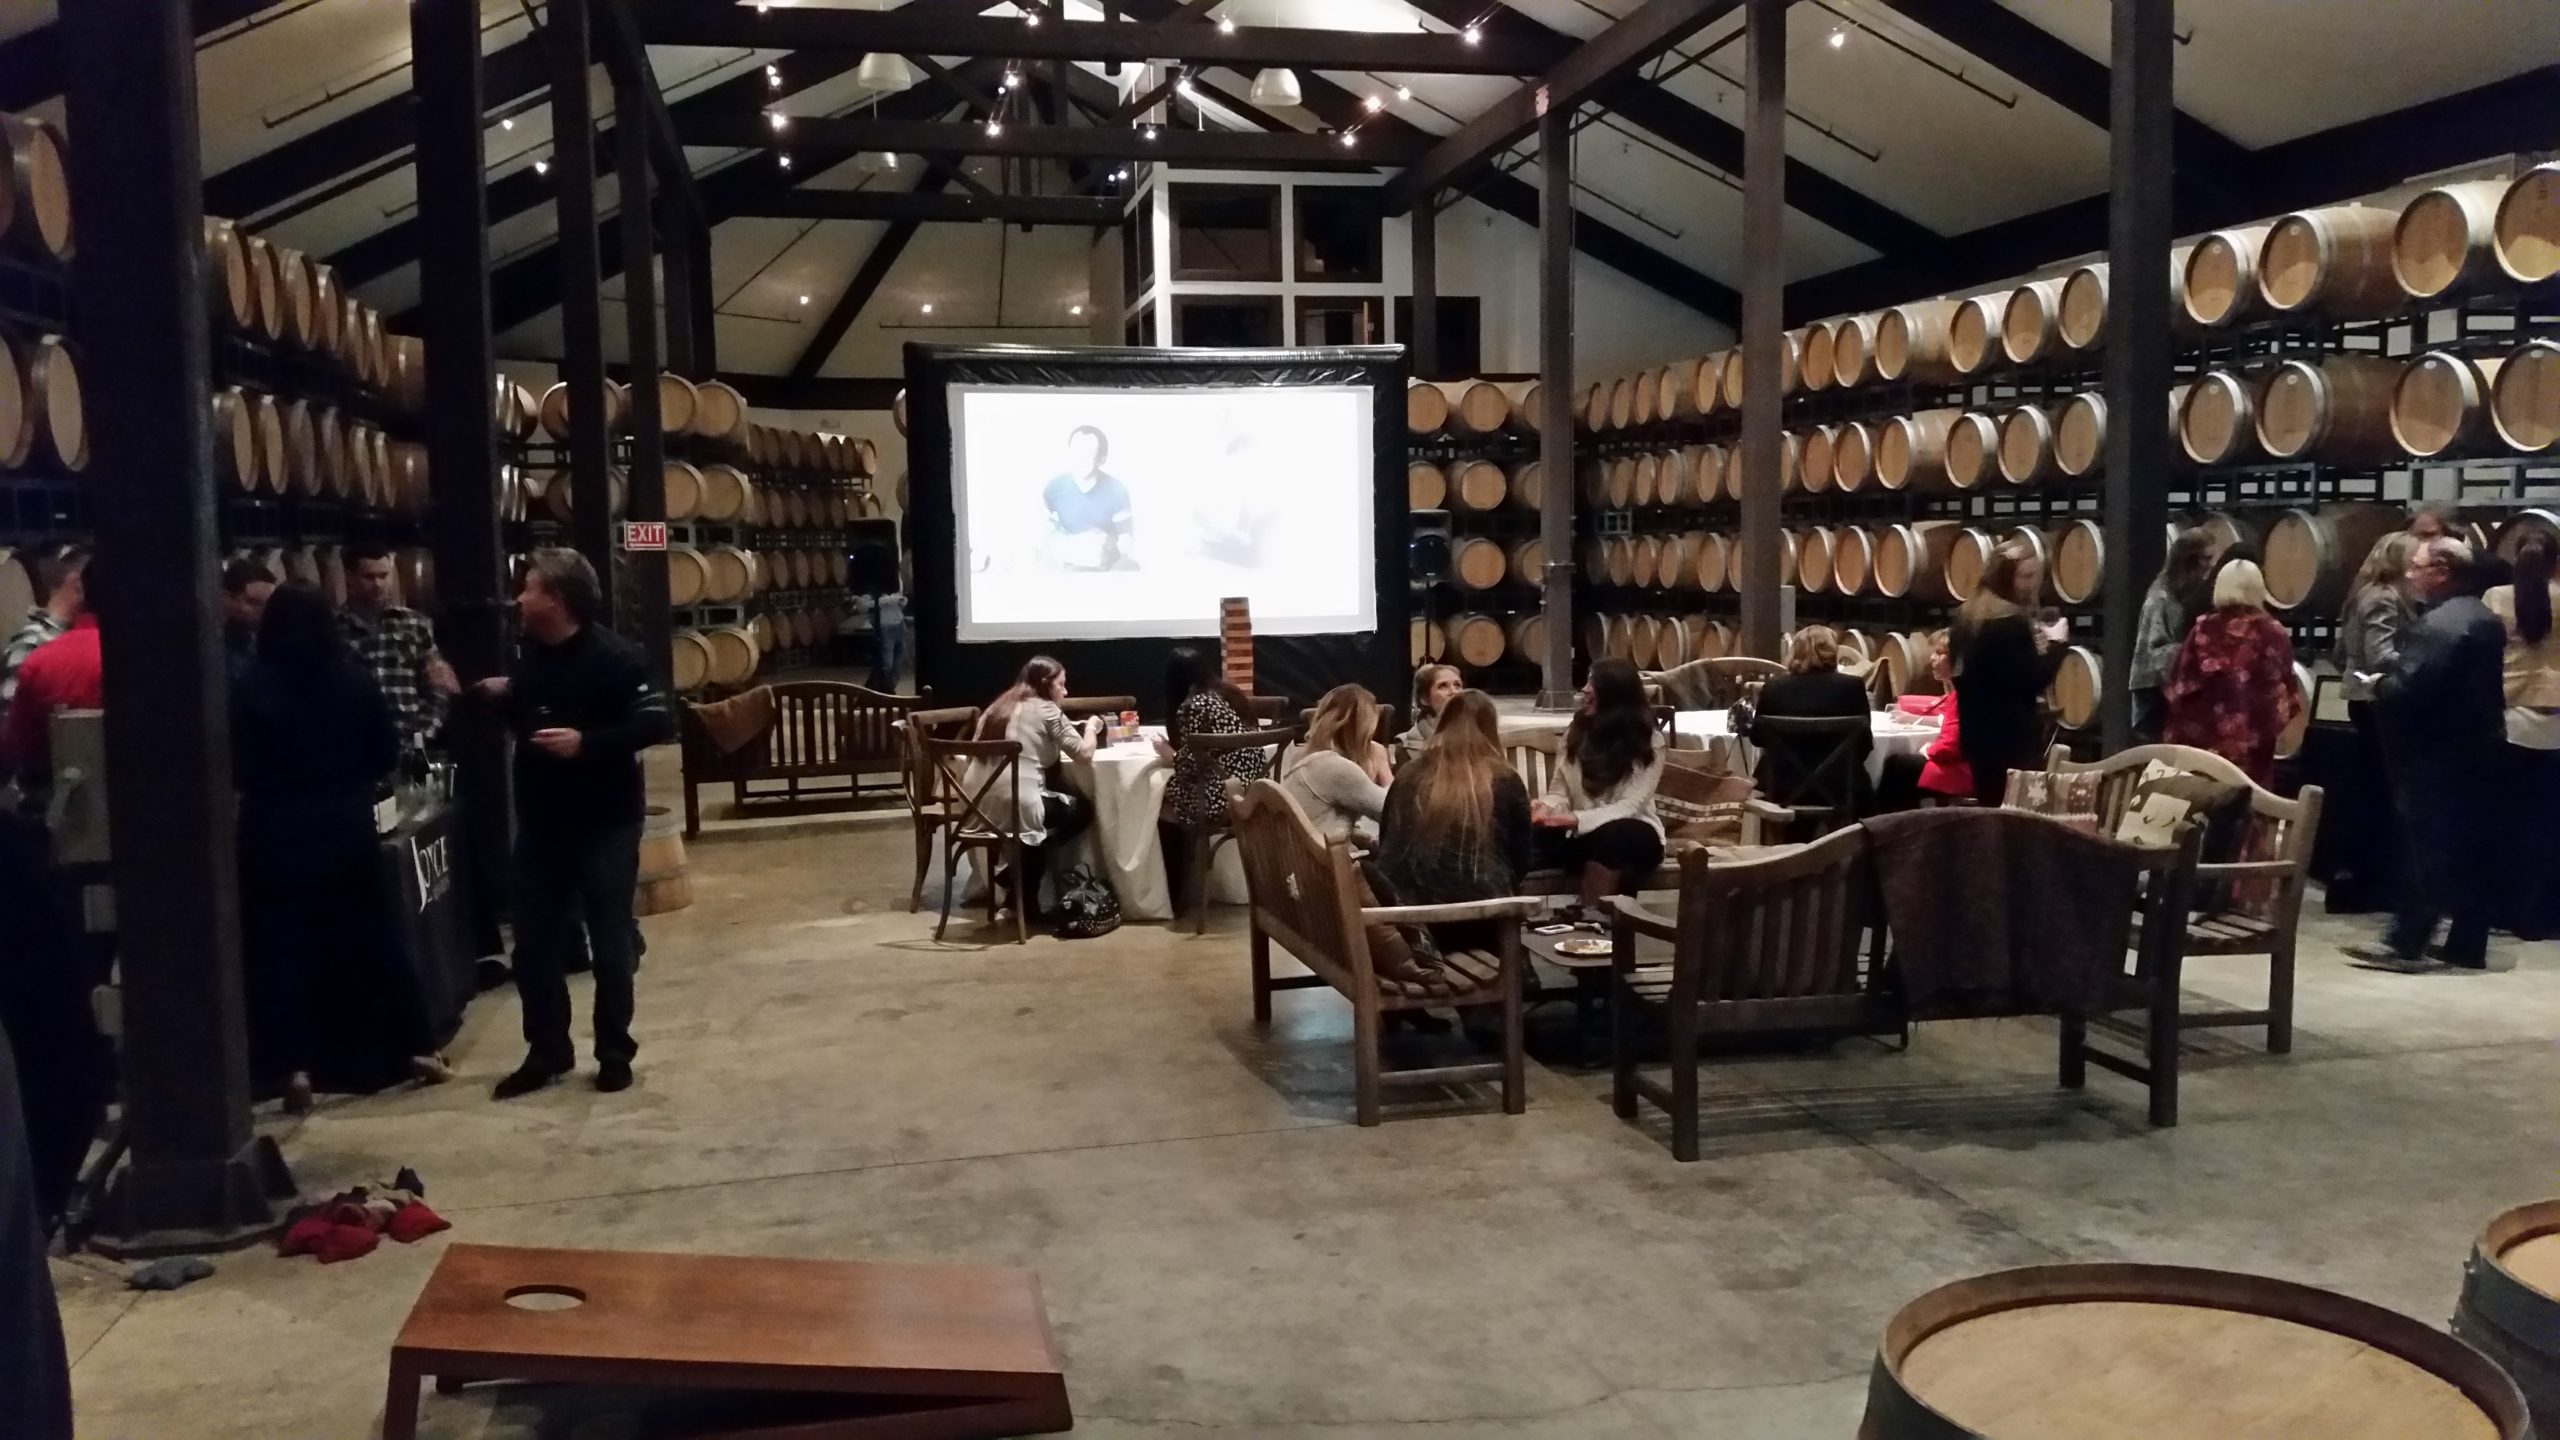 Family and friends watching a movie on a FunFlicks inflatable screen at their community winery.